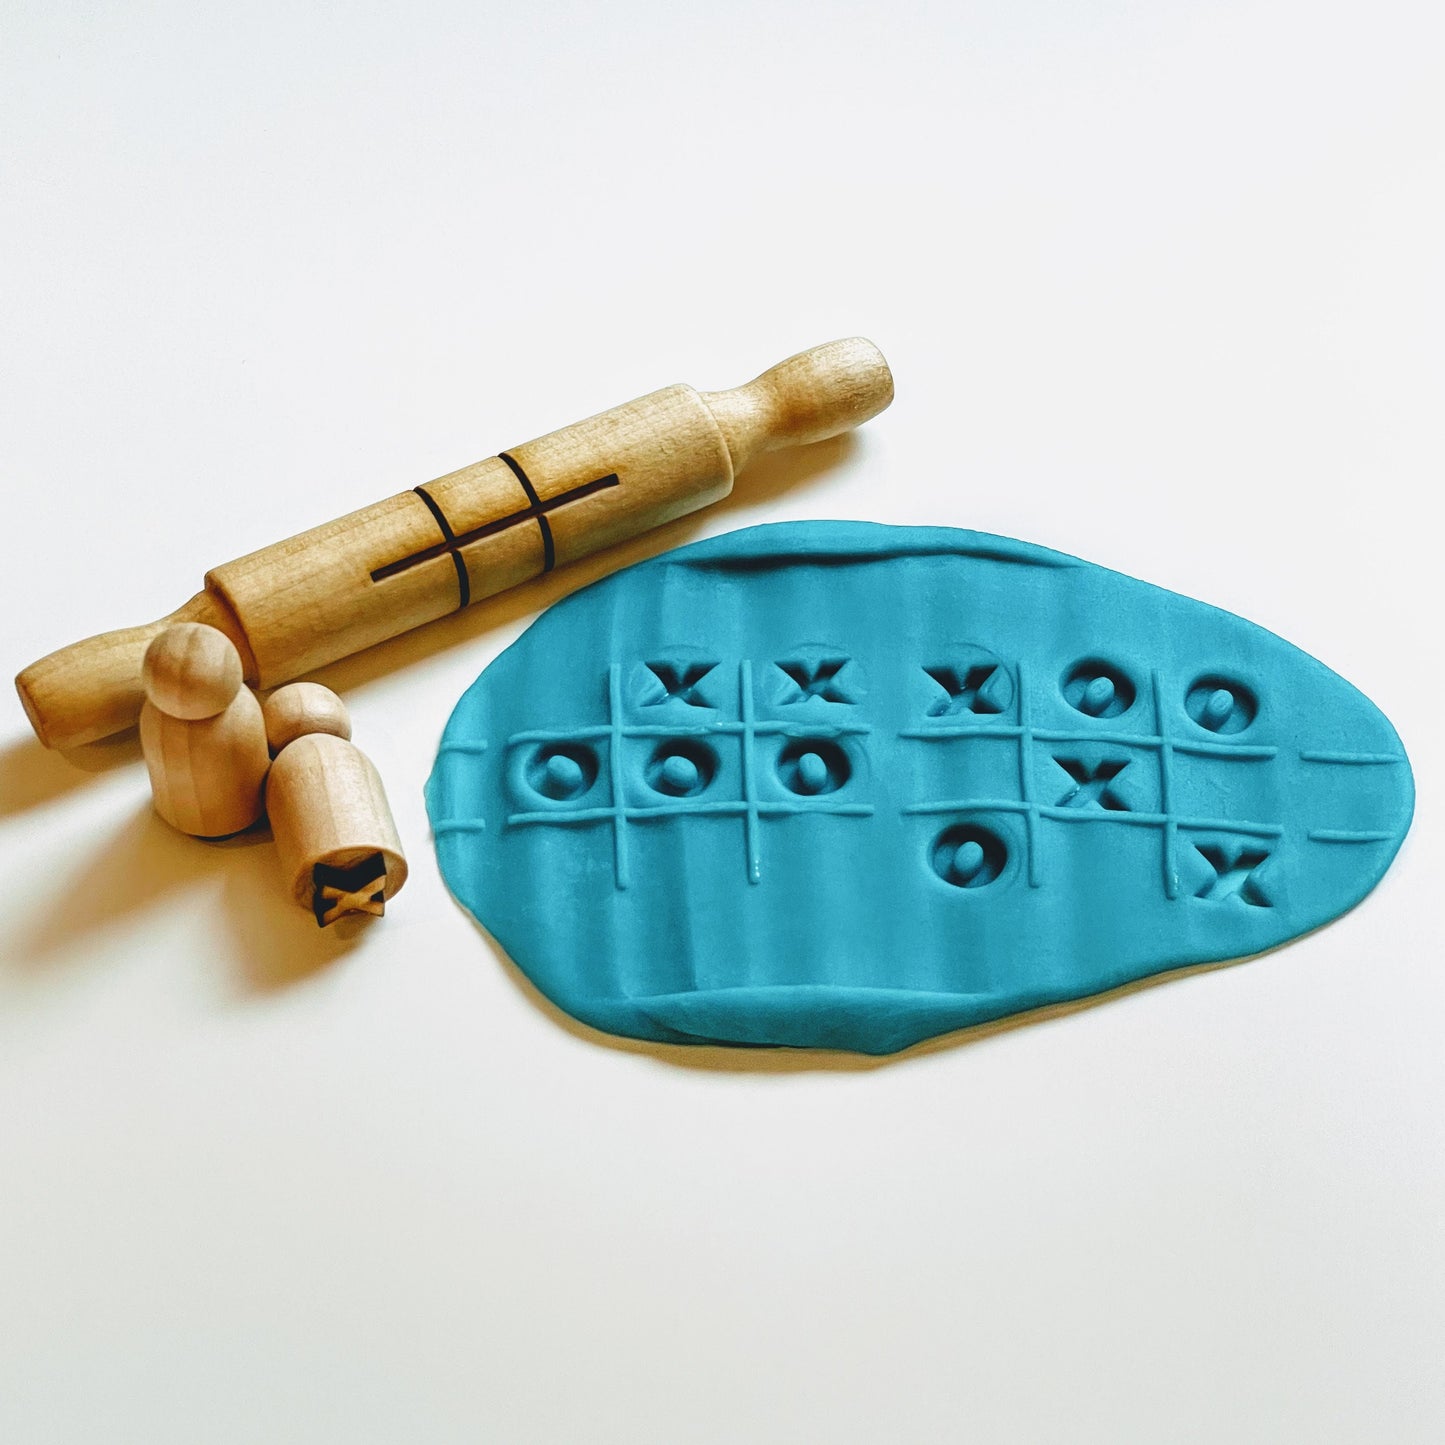 Tic-Tac-Toe Texture Roller With Peg Doll Stamps